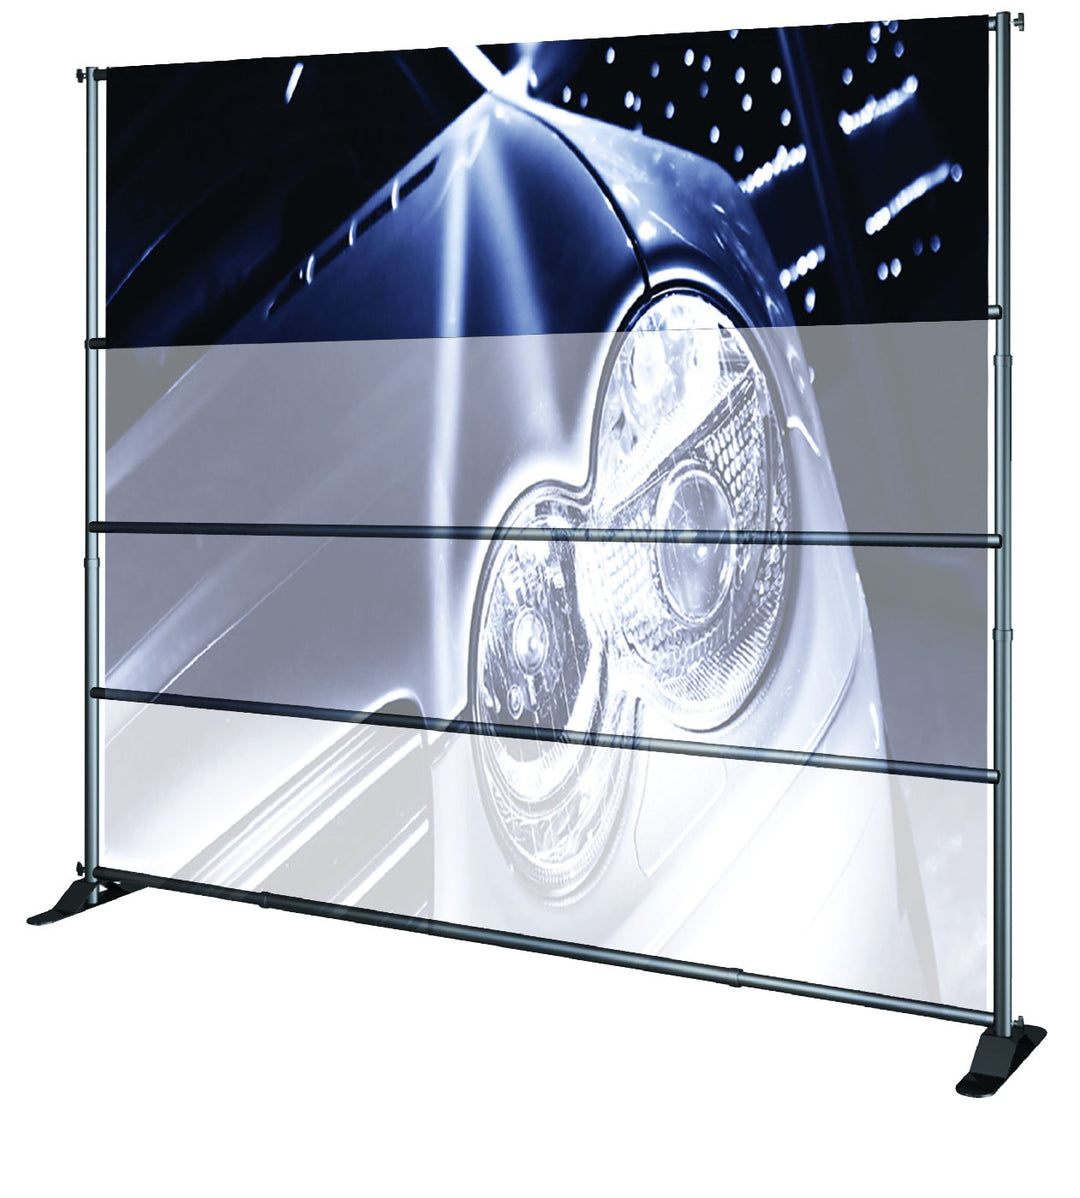 Large Format Banner Stand